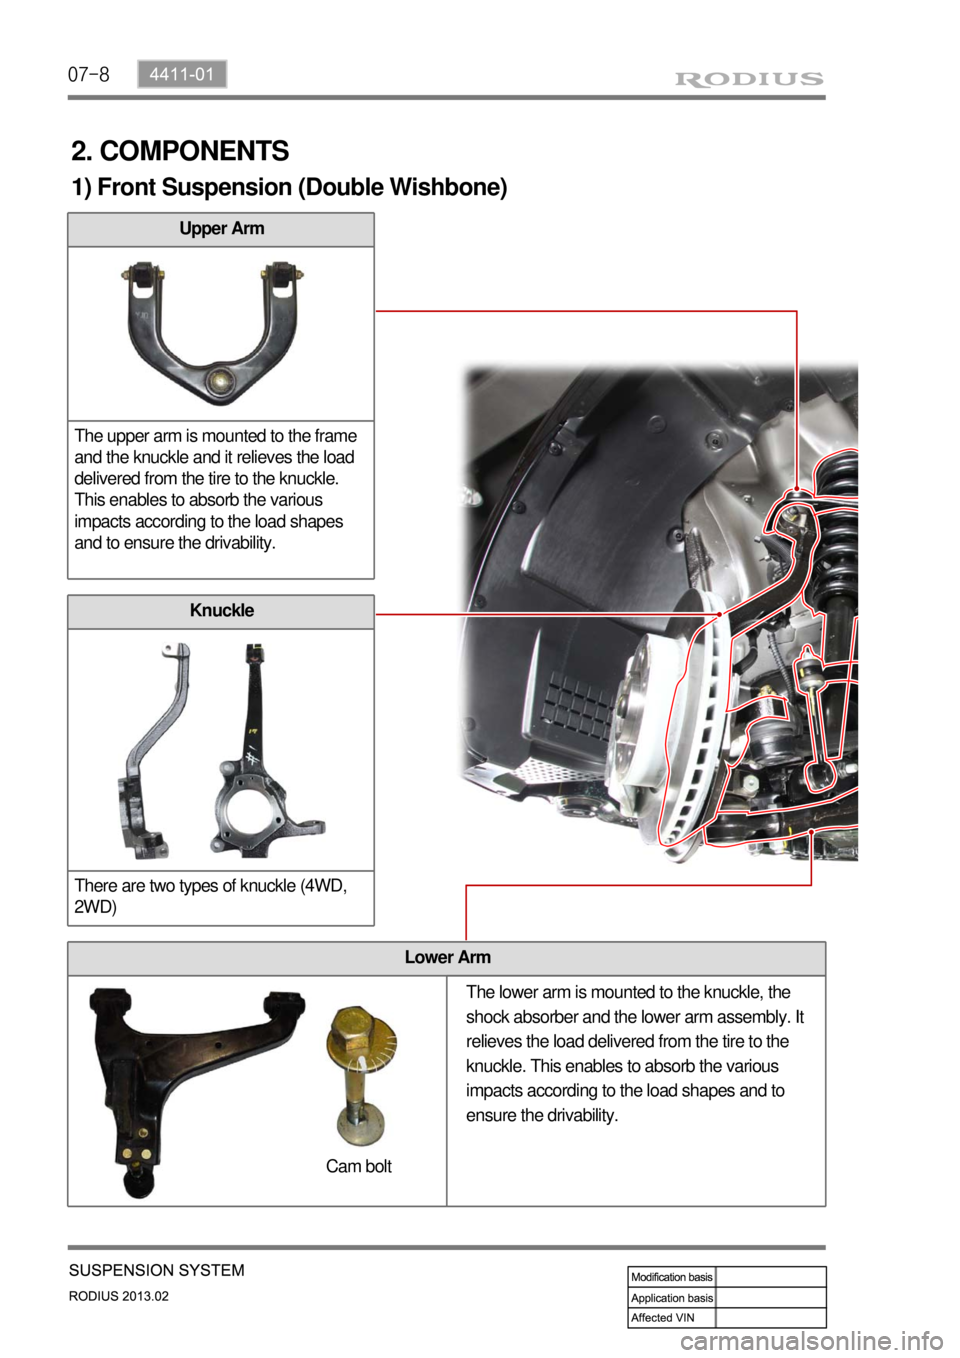 SSANGYONG TURISMO 2013  Service Manual 07-8
Upper Arm
The upper arm is mounted to the frame 
and the knuckle and it relieves the load 
delivered from the tire to the knuckle. 
This enables to absorb the various 
impacts according to the lo